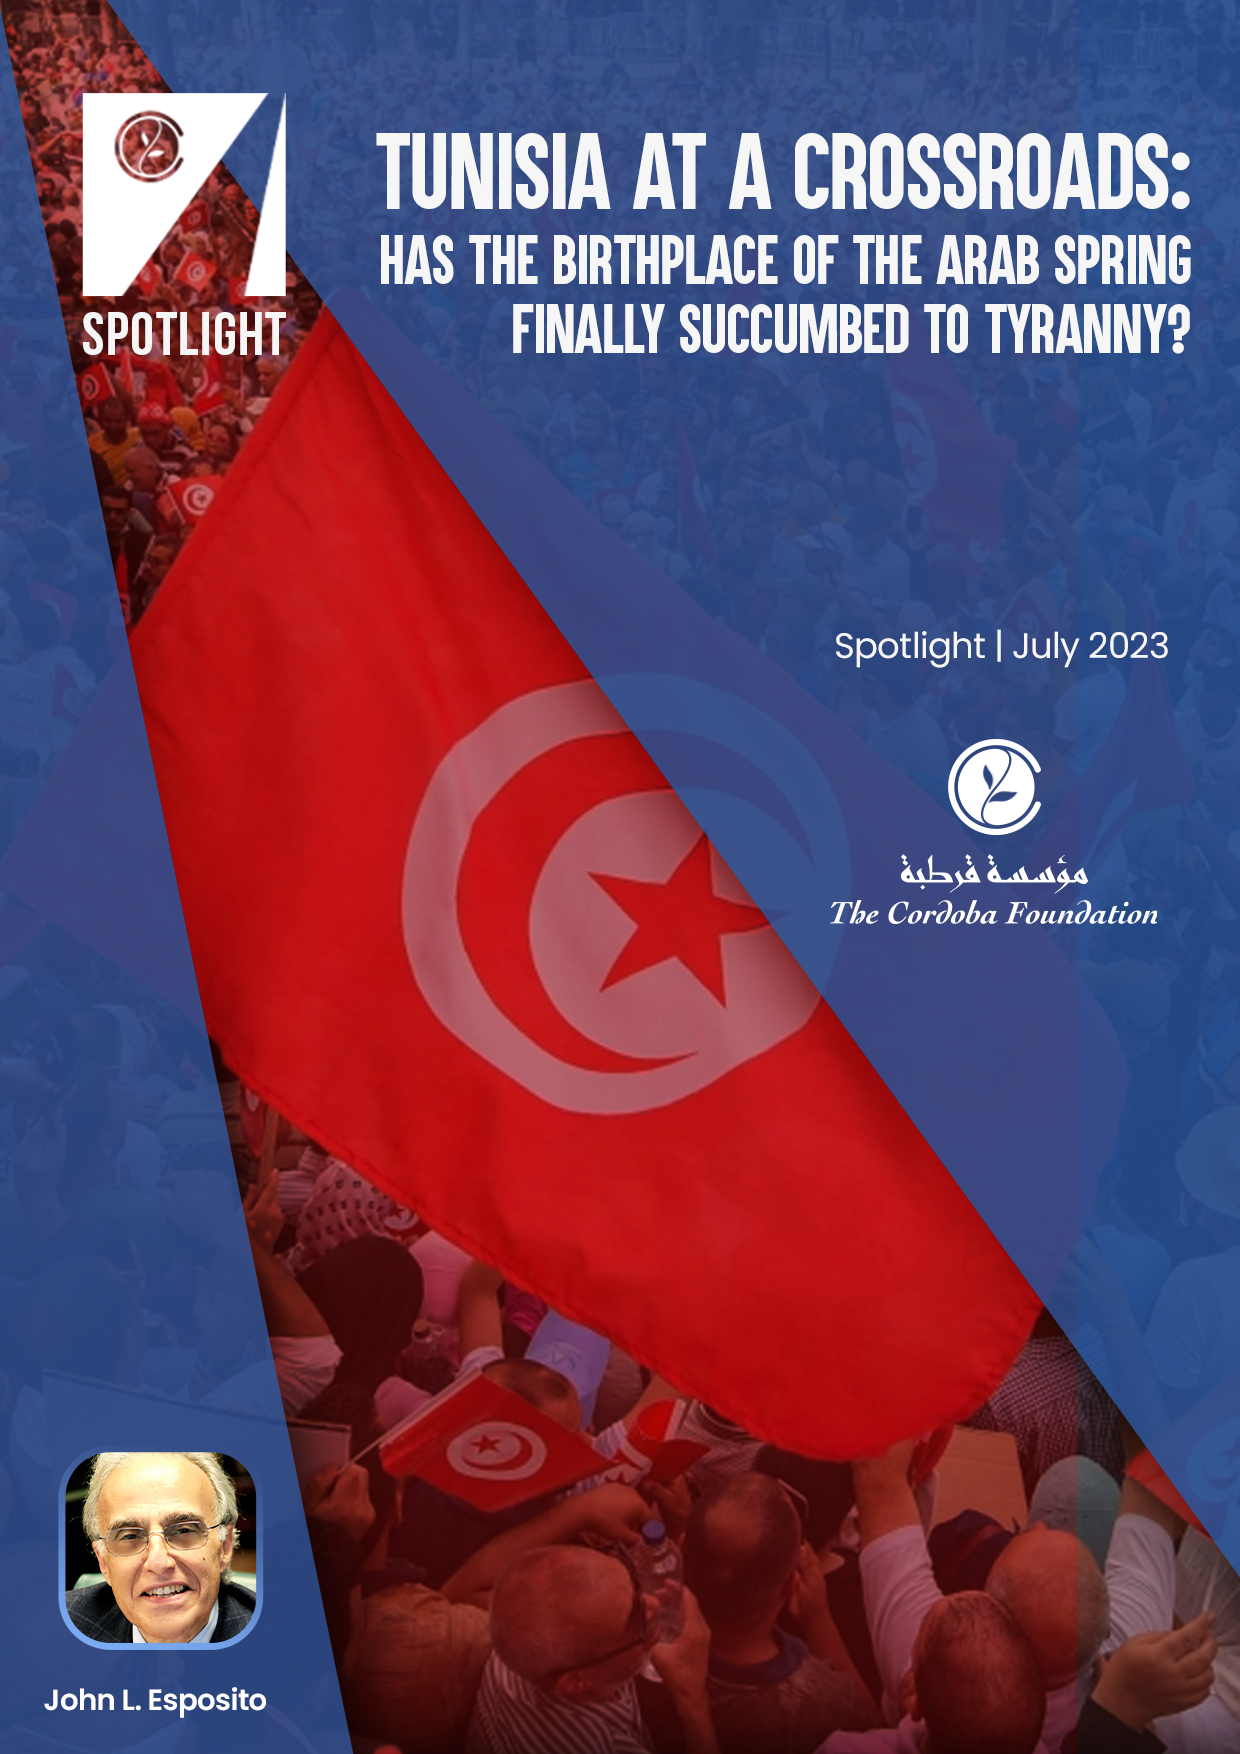 Tunisia at a Crossroads:  Has the birthplace of the Arab Spring finally succumbed to tyranny?